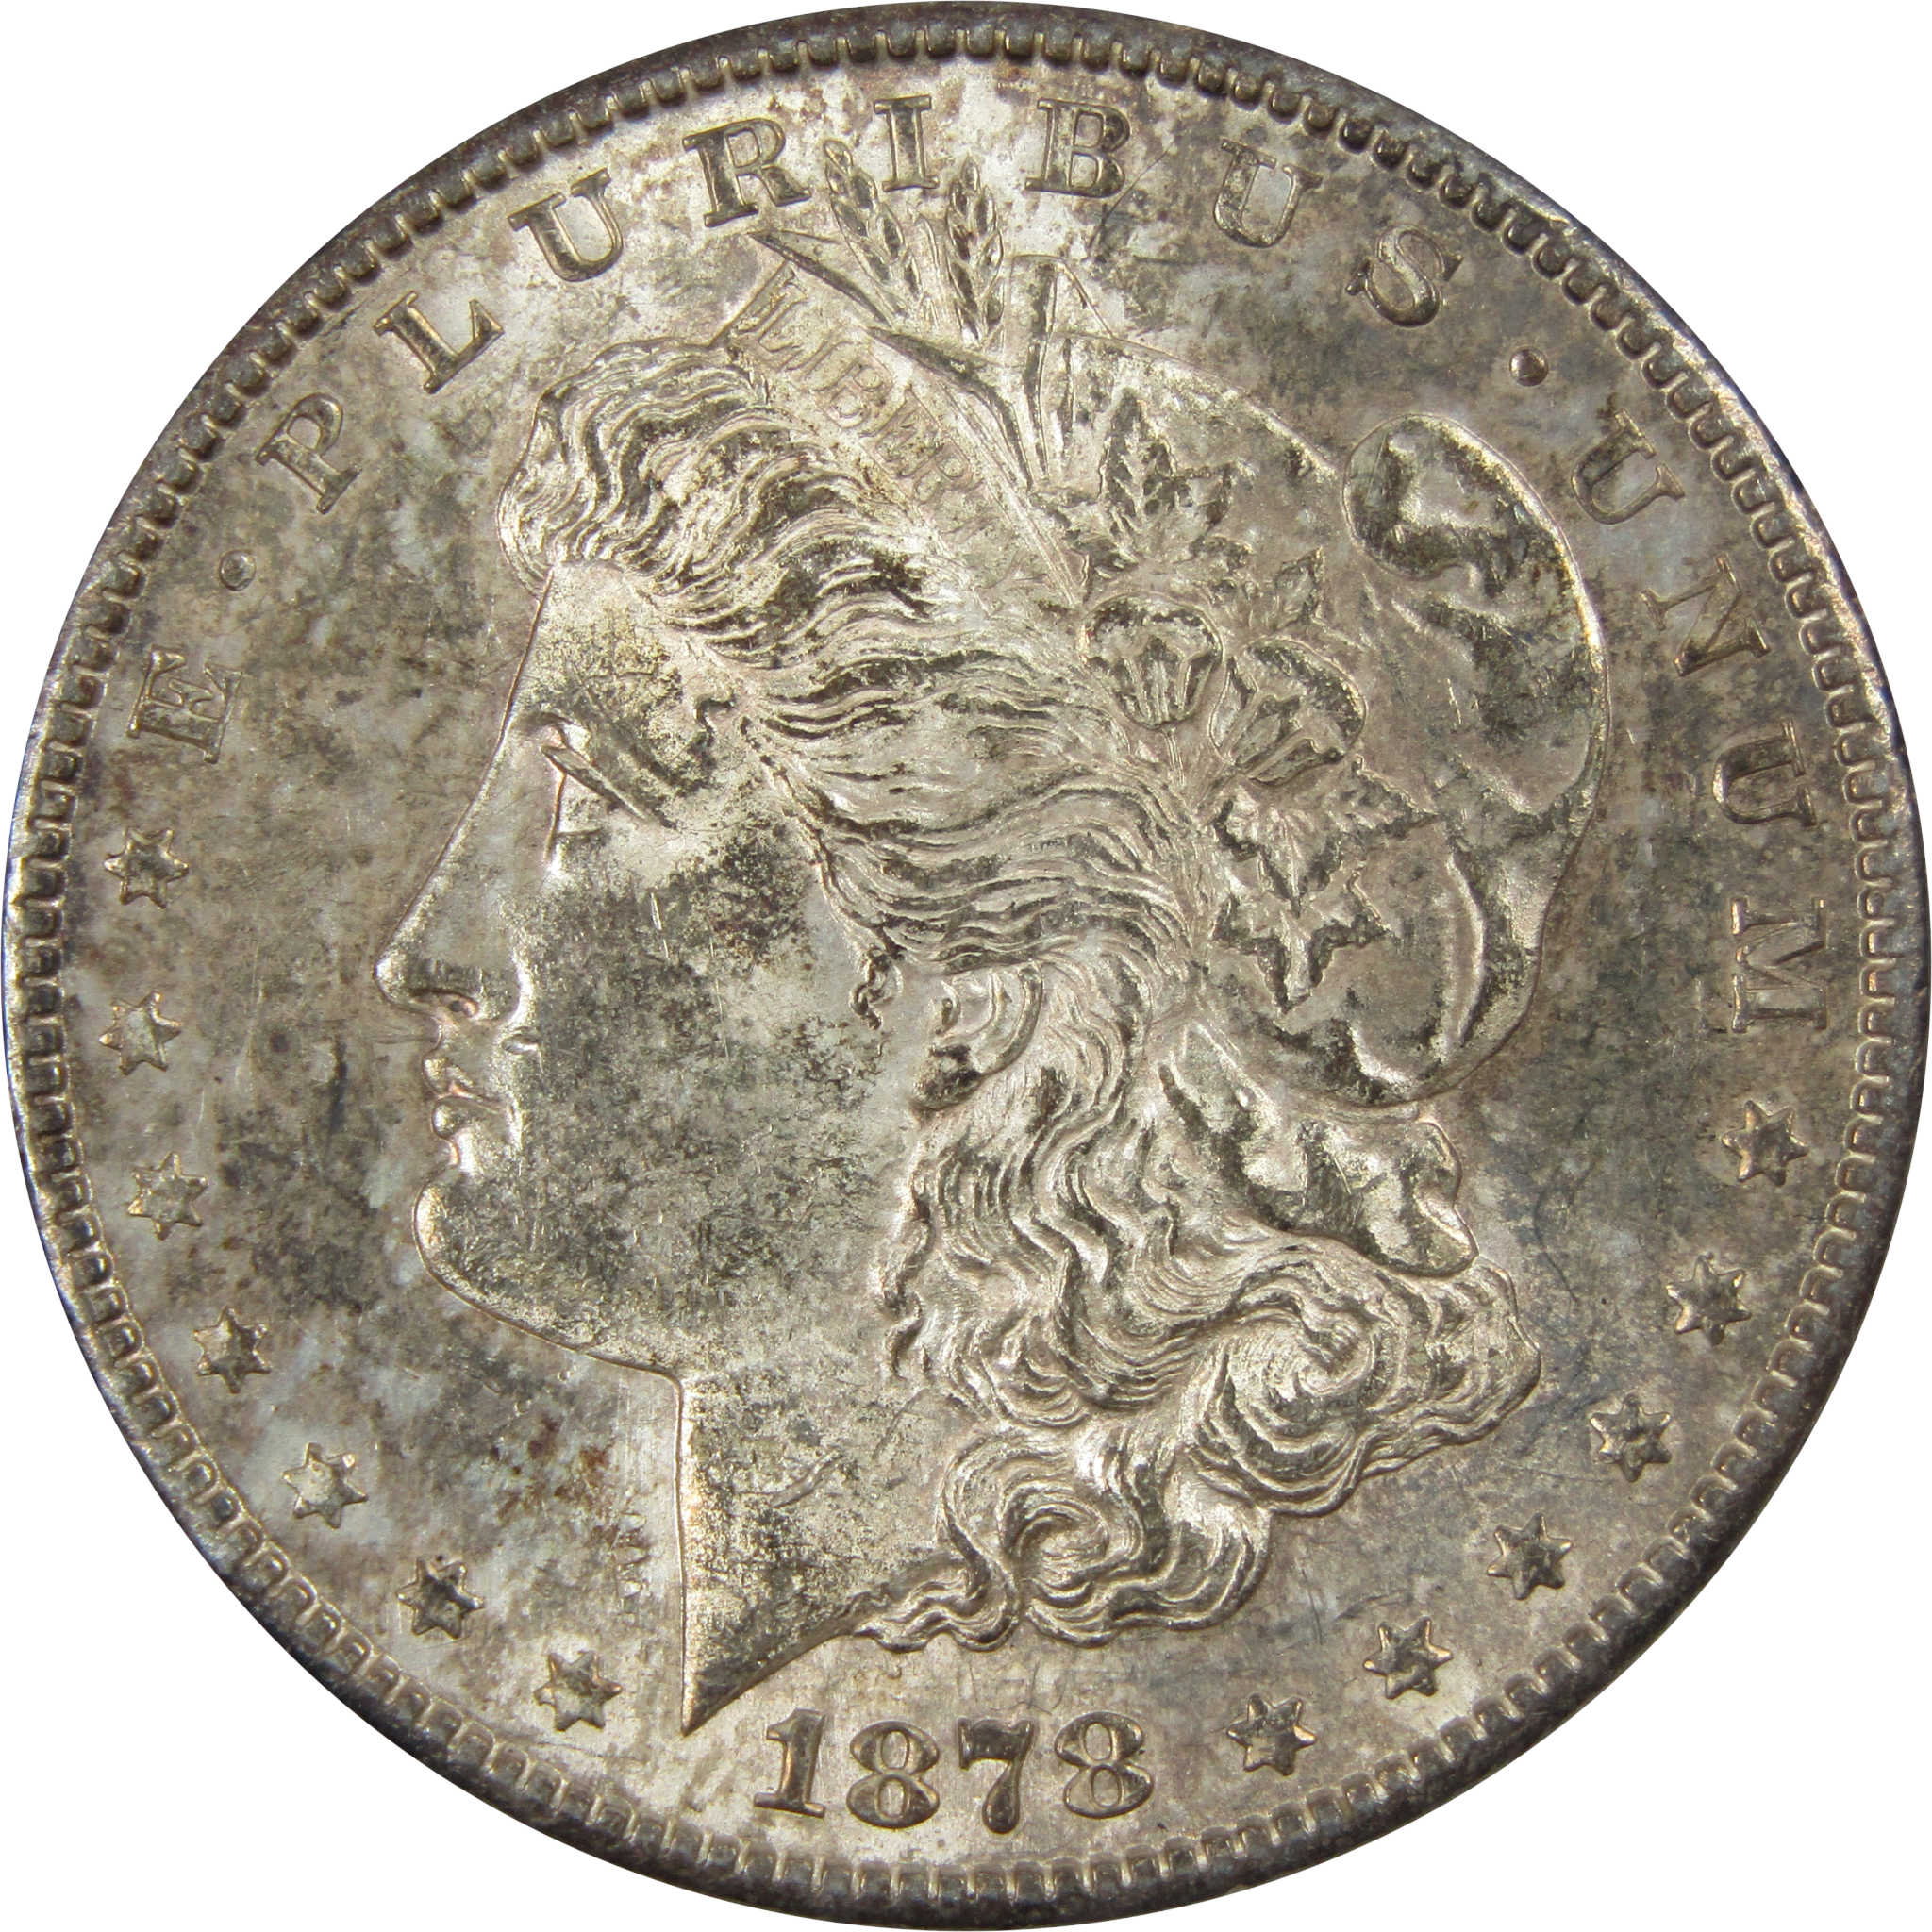 1878 S Morgan Dollar XF EF Extremely Fine 90% Silver $1 Coin SKU:I7009 - Morgan coin - Morgan silver dollar - Morgan silver dollar for sale - Profile Coins &amp; Collectibles